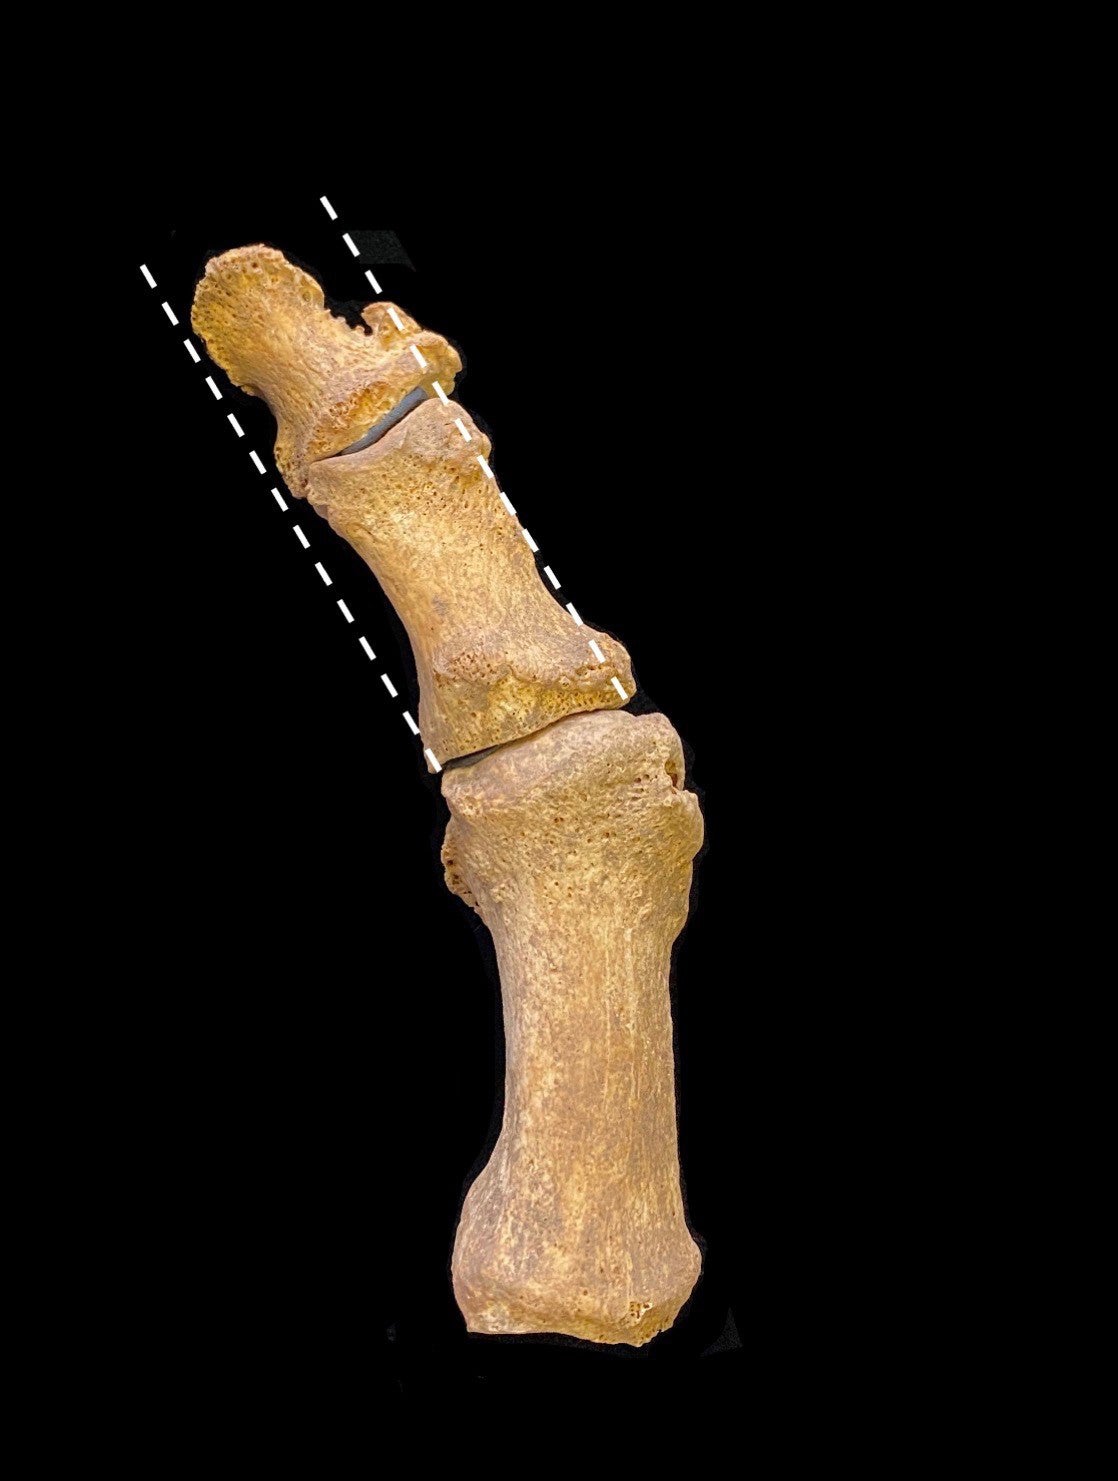 A deviated medieval toe, suggesting the individual suffered from bunions. (Image: Jenna Dittmar)